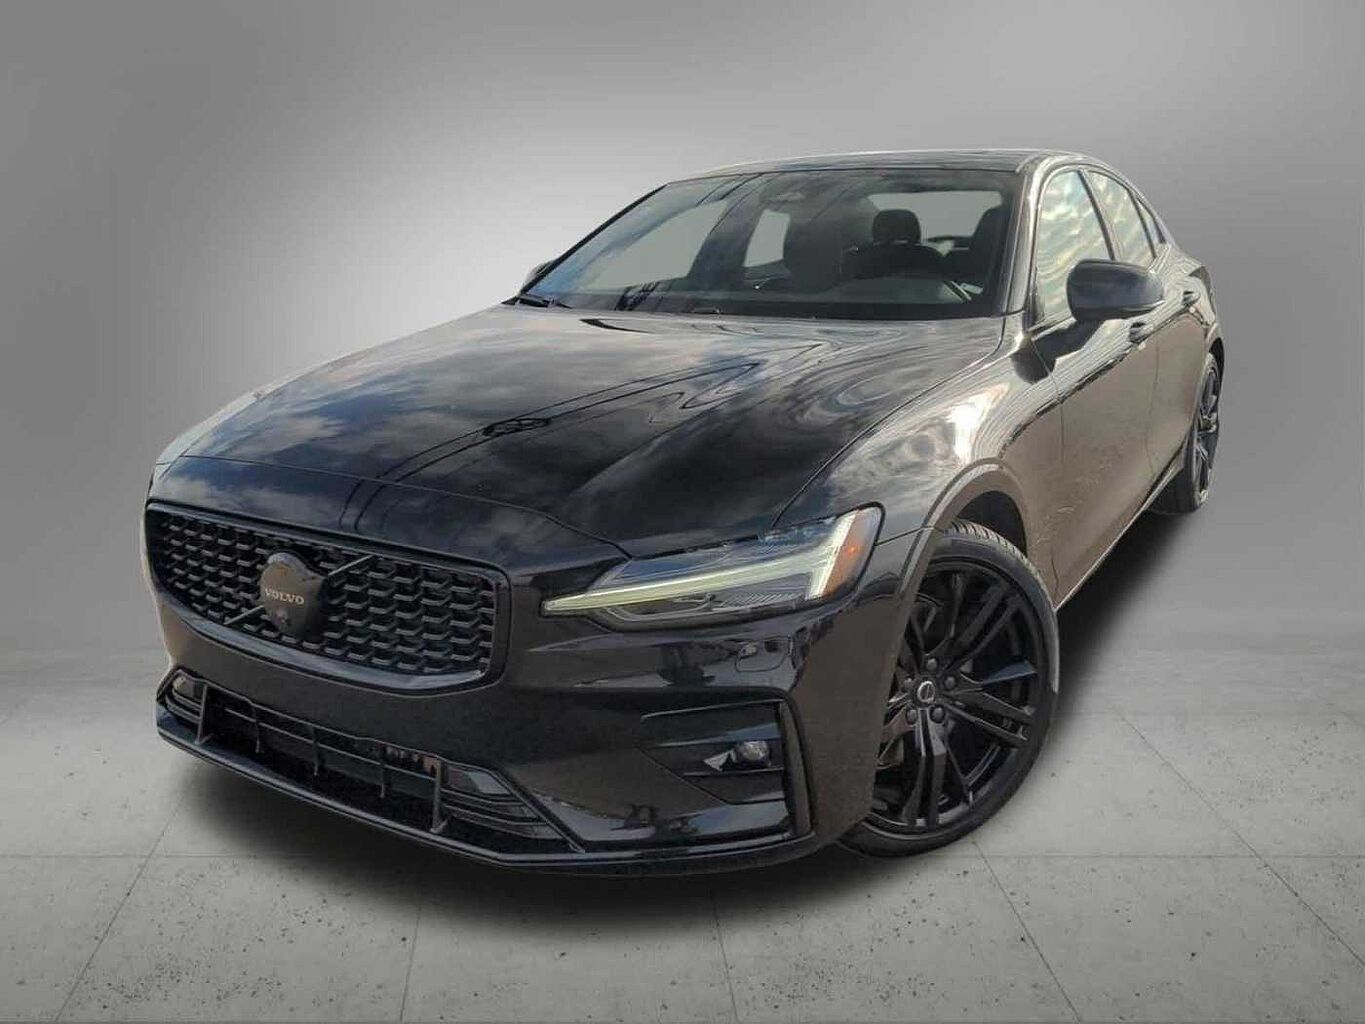 Pre-owned Volvo S60 Cars for Sale on Certified by Volvo | Volvo Car  Corporation (or its affiliates or licensors)